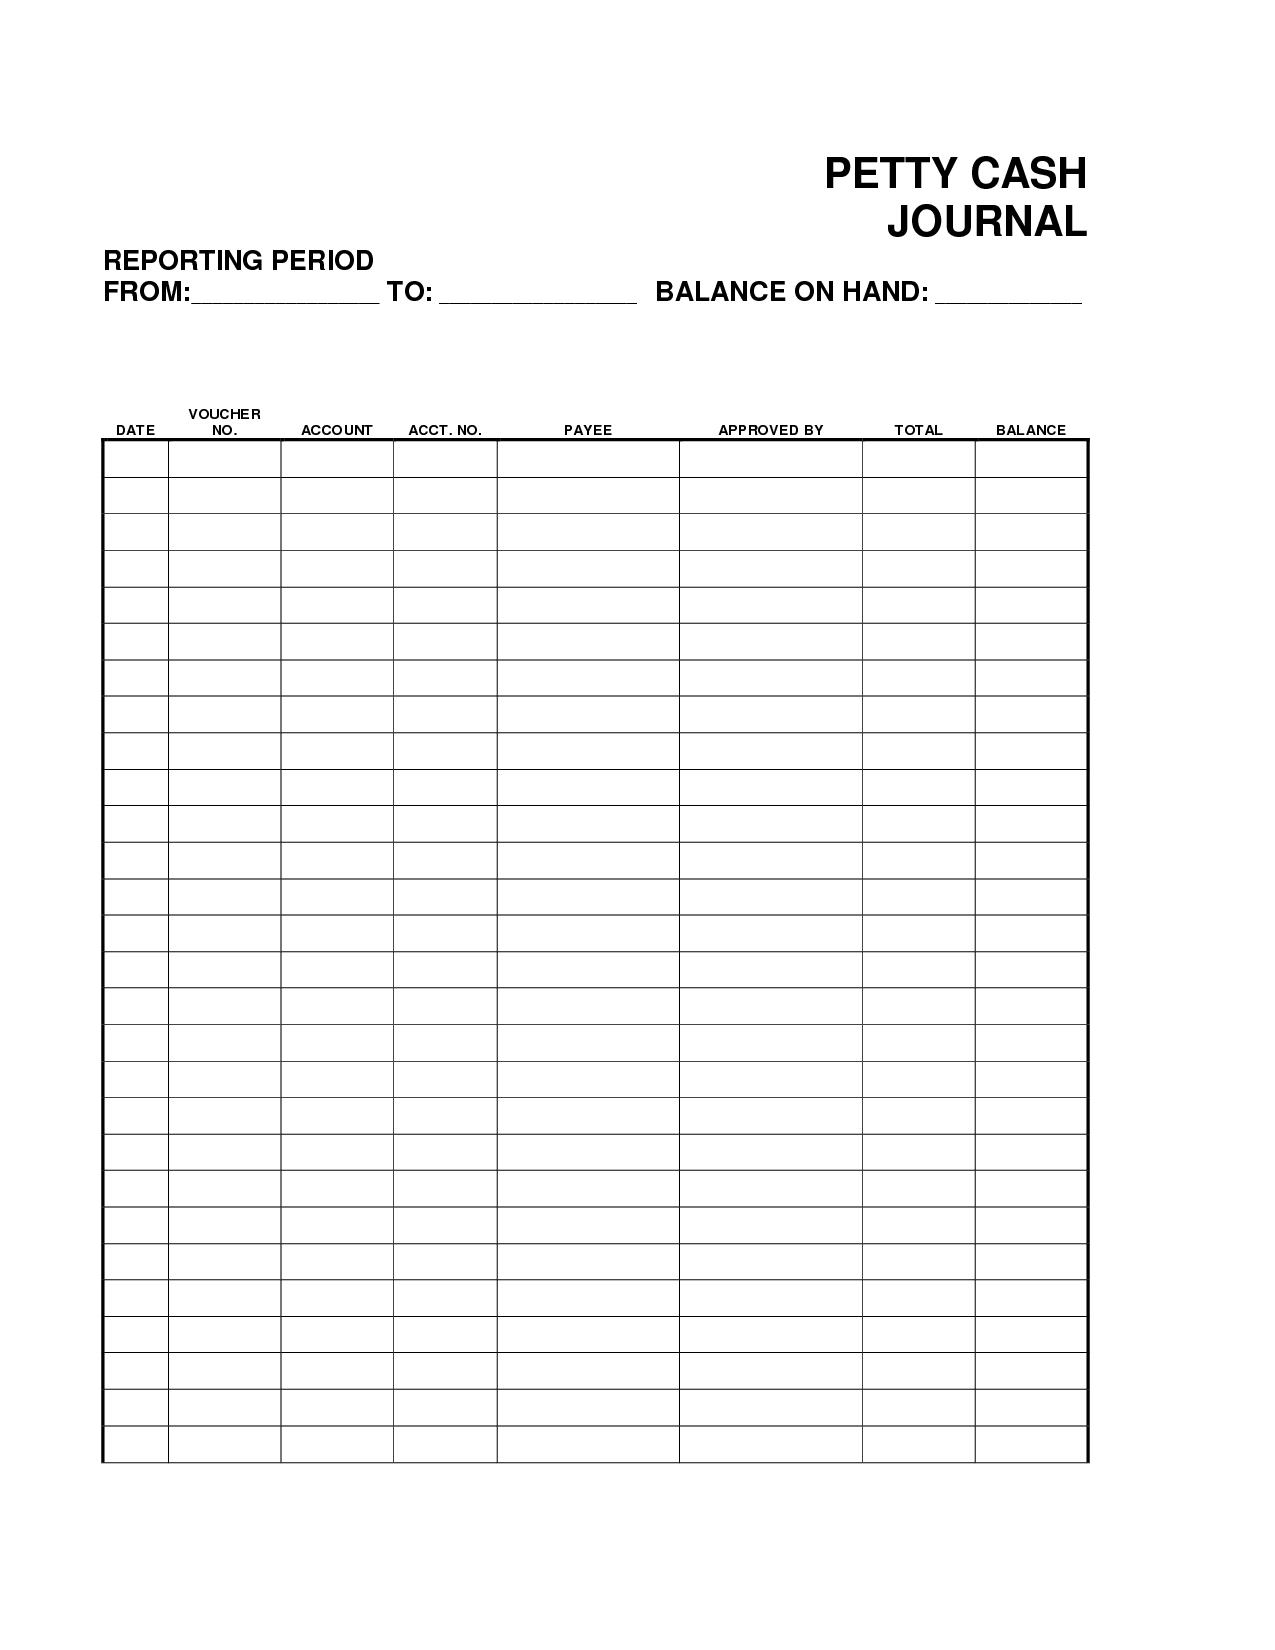 Petty Cash Spreadsheet Example Spreadsheet Downloa Petty Cash Throughout Petty Cash Expense Report Template